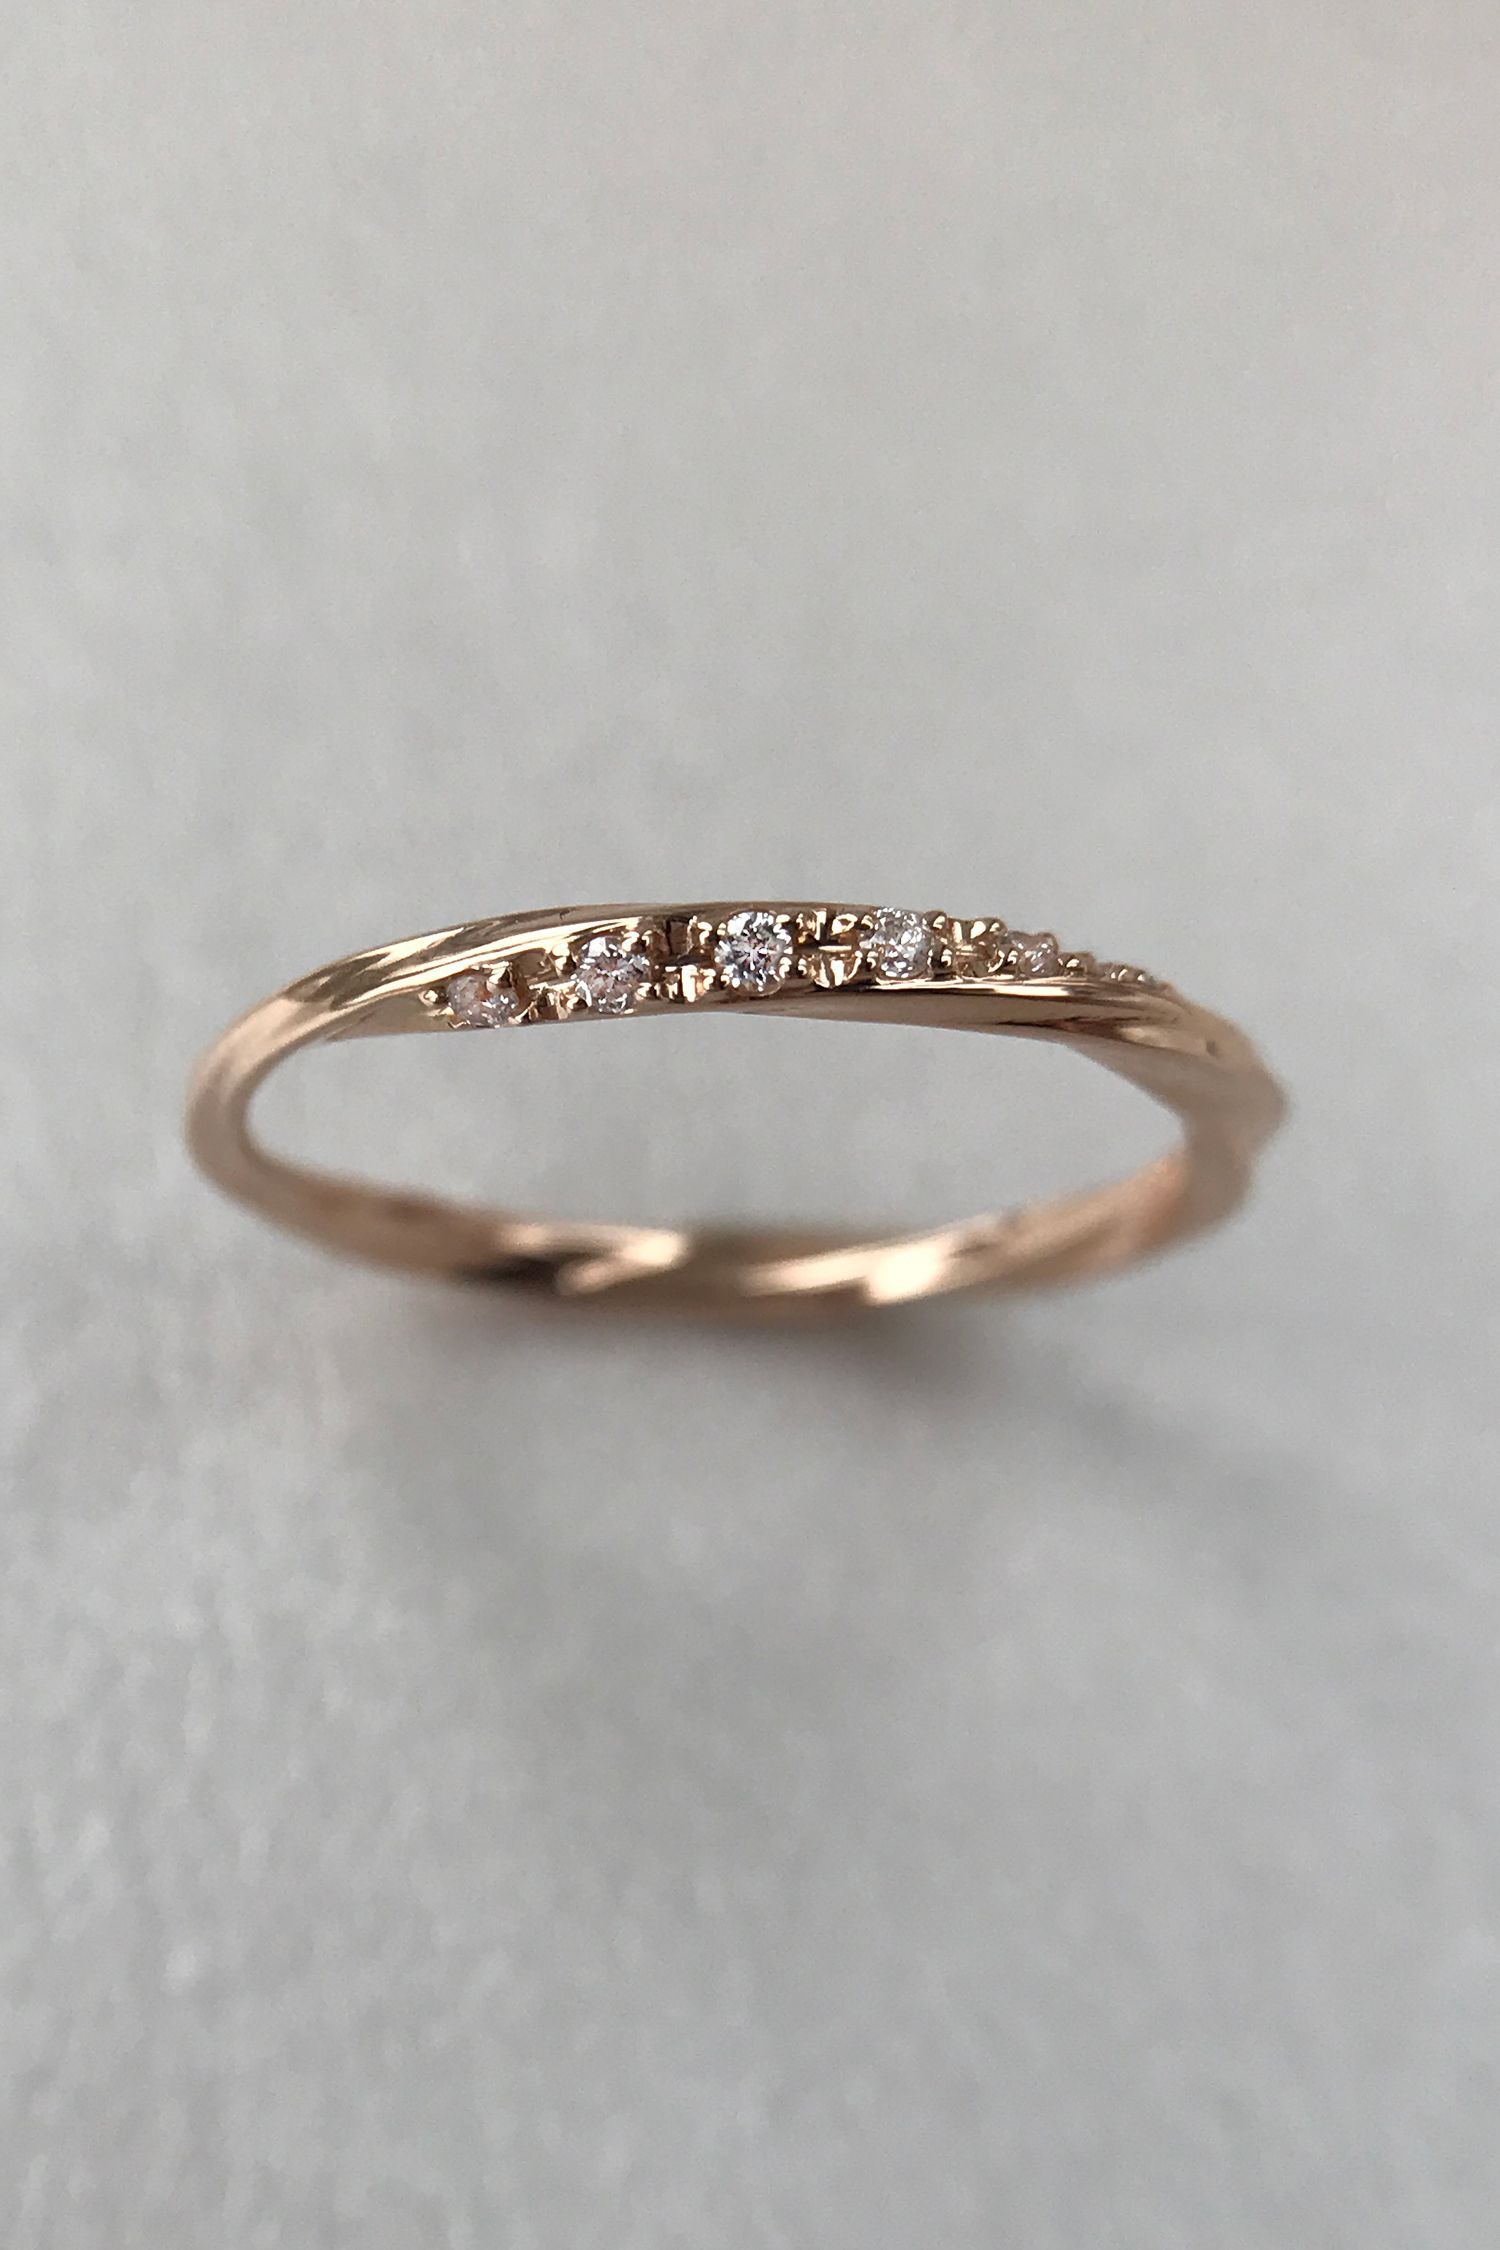 Unique Diamond Eternity Curved Wedding Band, Dainty 14k Regarding Best And Newest Enhanced Cognac Diamond Vintage Style Anniversary Bands In Rose Gold (View 16 of 25)